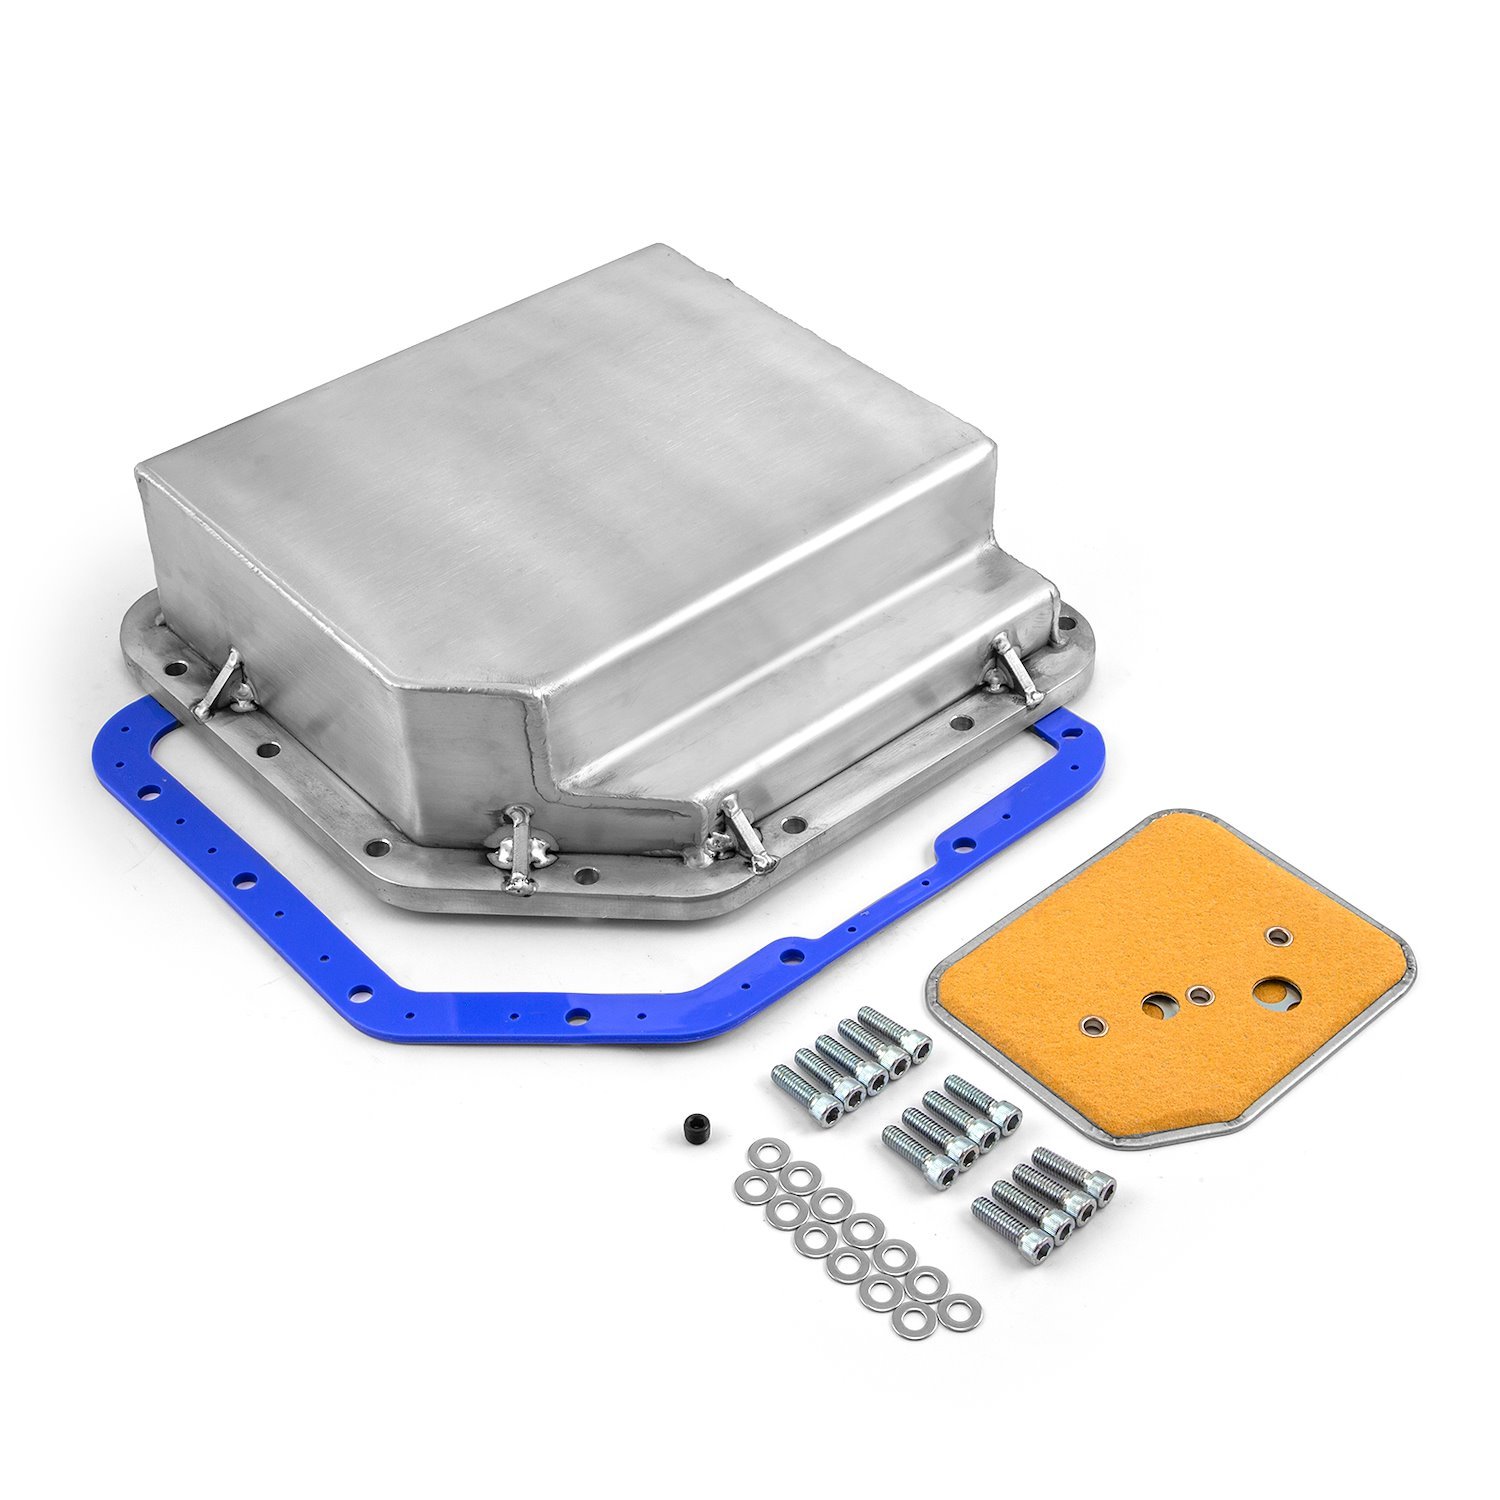 PCE221.1030 GM Turbo TH350 Extra Capacity Fabricated Aluminum Transmission Oil Pan